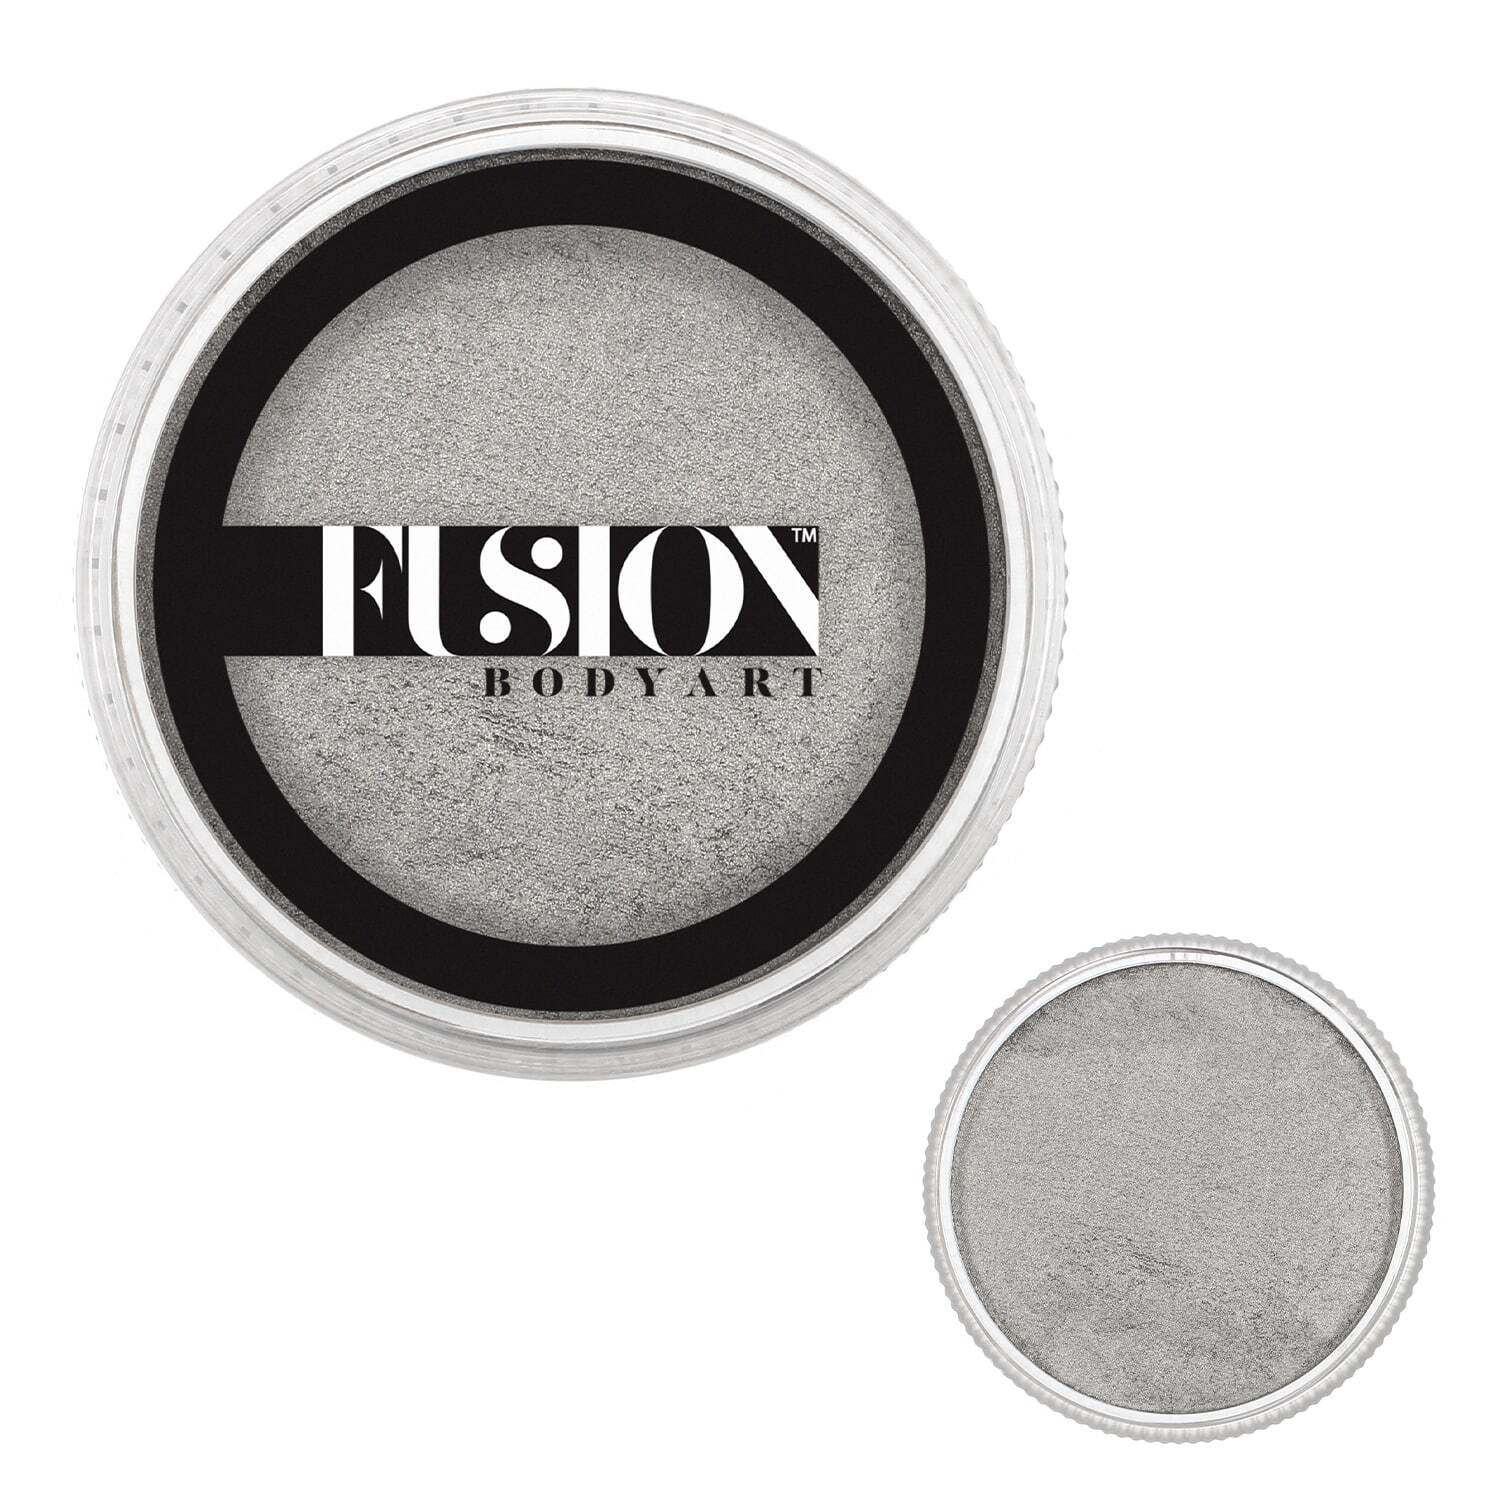 Fusion Body Art Face Paints – Pearl Metallic Silver | 32g